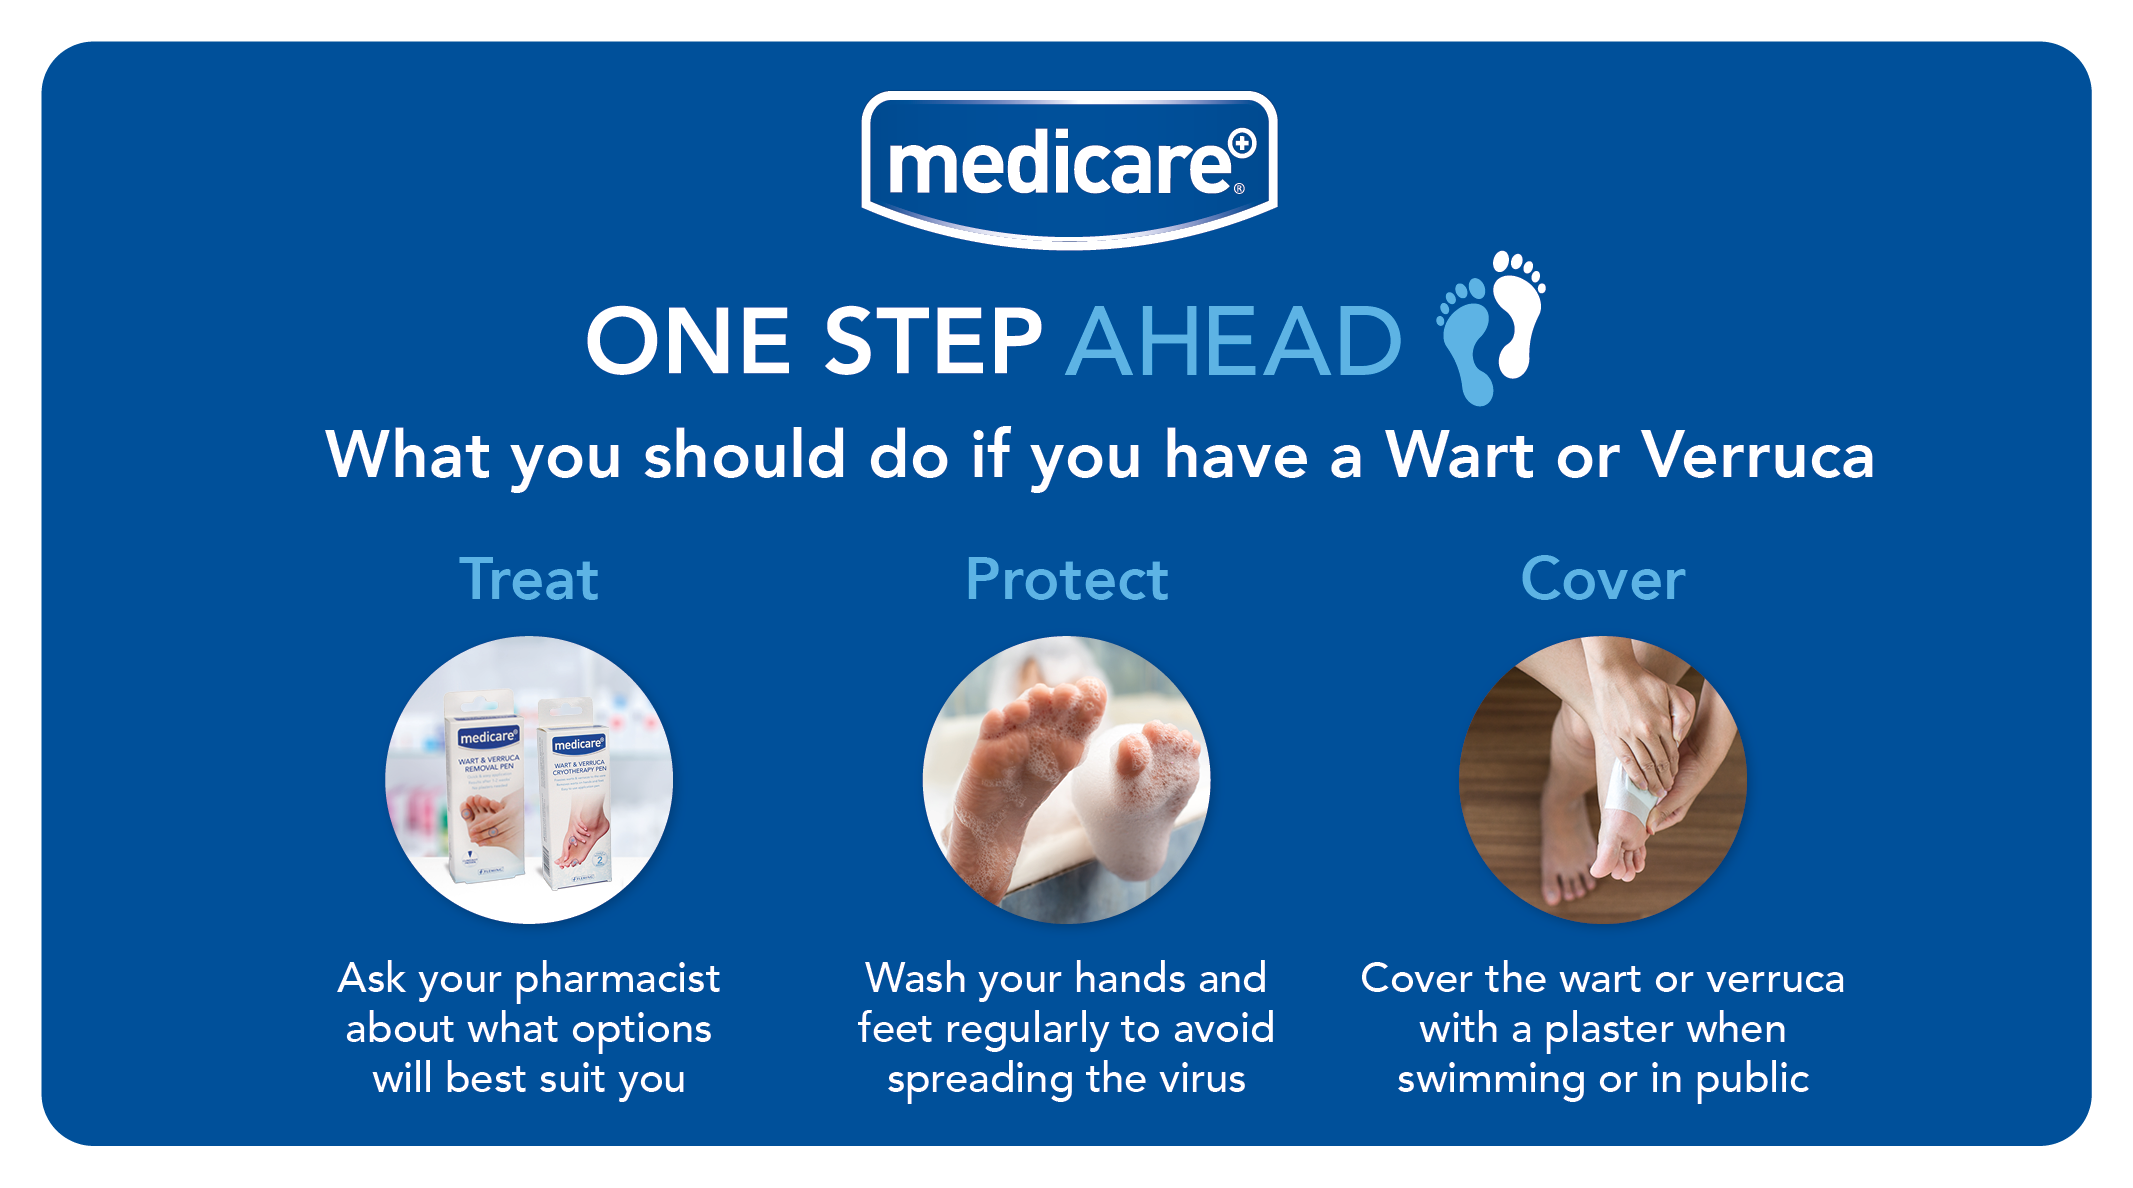 What do I do if I have a Wart or Verruca? Treat, Protect, Cover